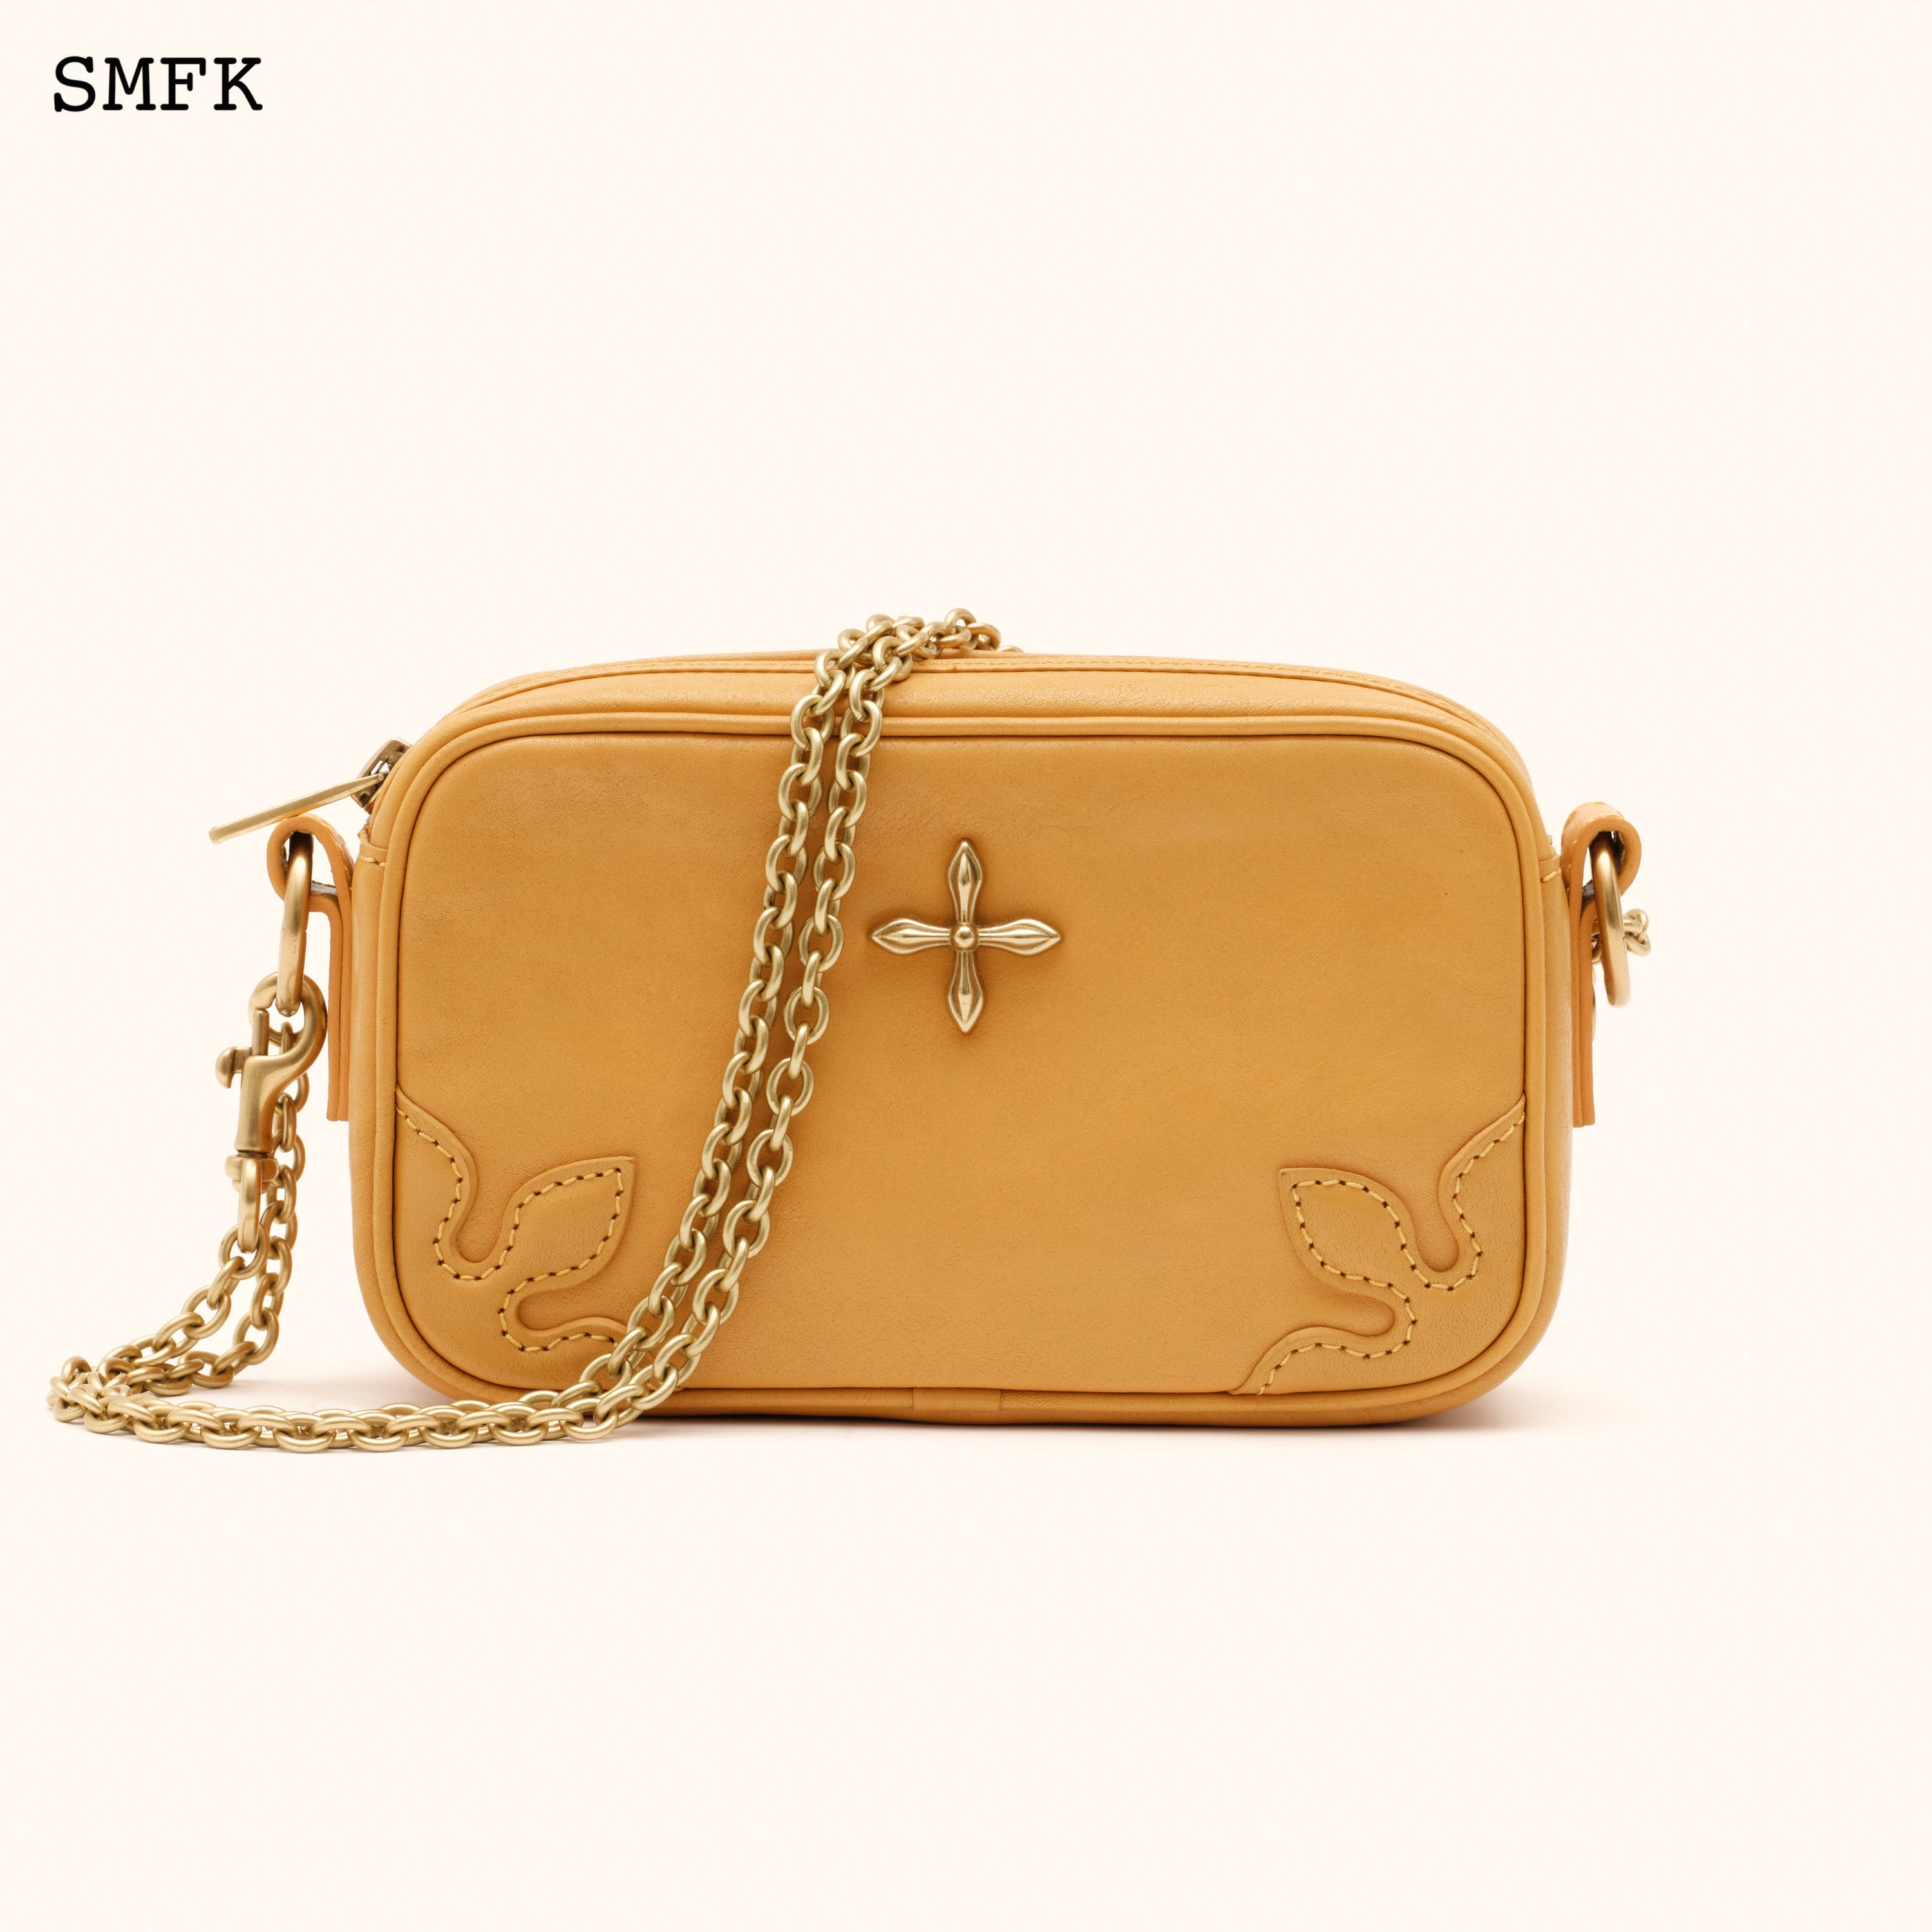 Compass Adventure Small Chain Bag in Cheese - SMFK Official